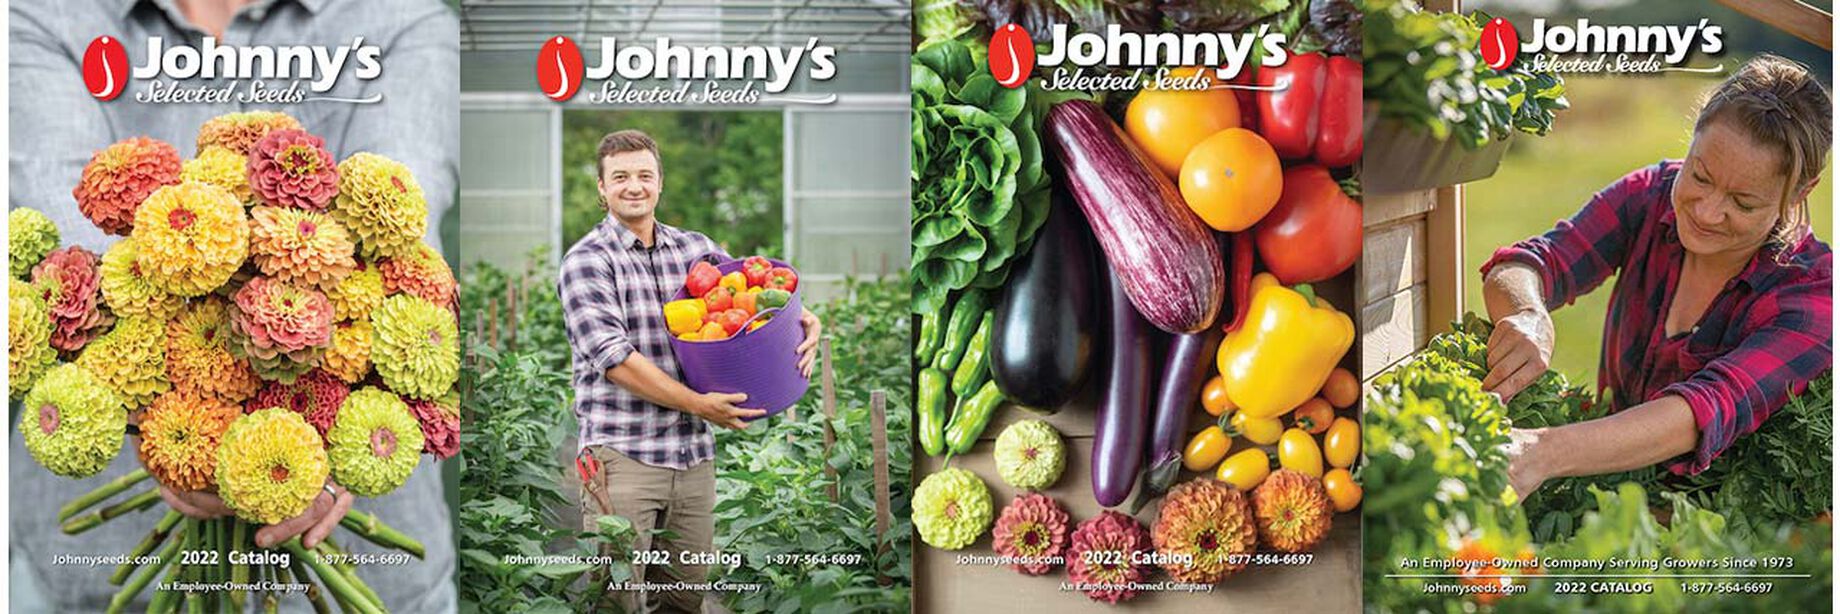 Request a Free Seed Catalog Johnny's Selected Seeds